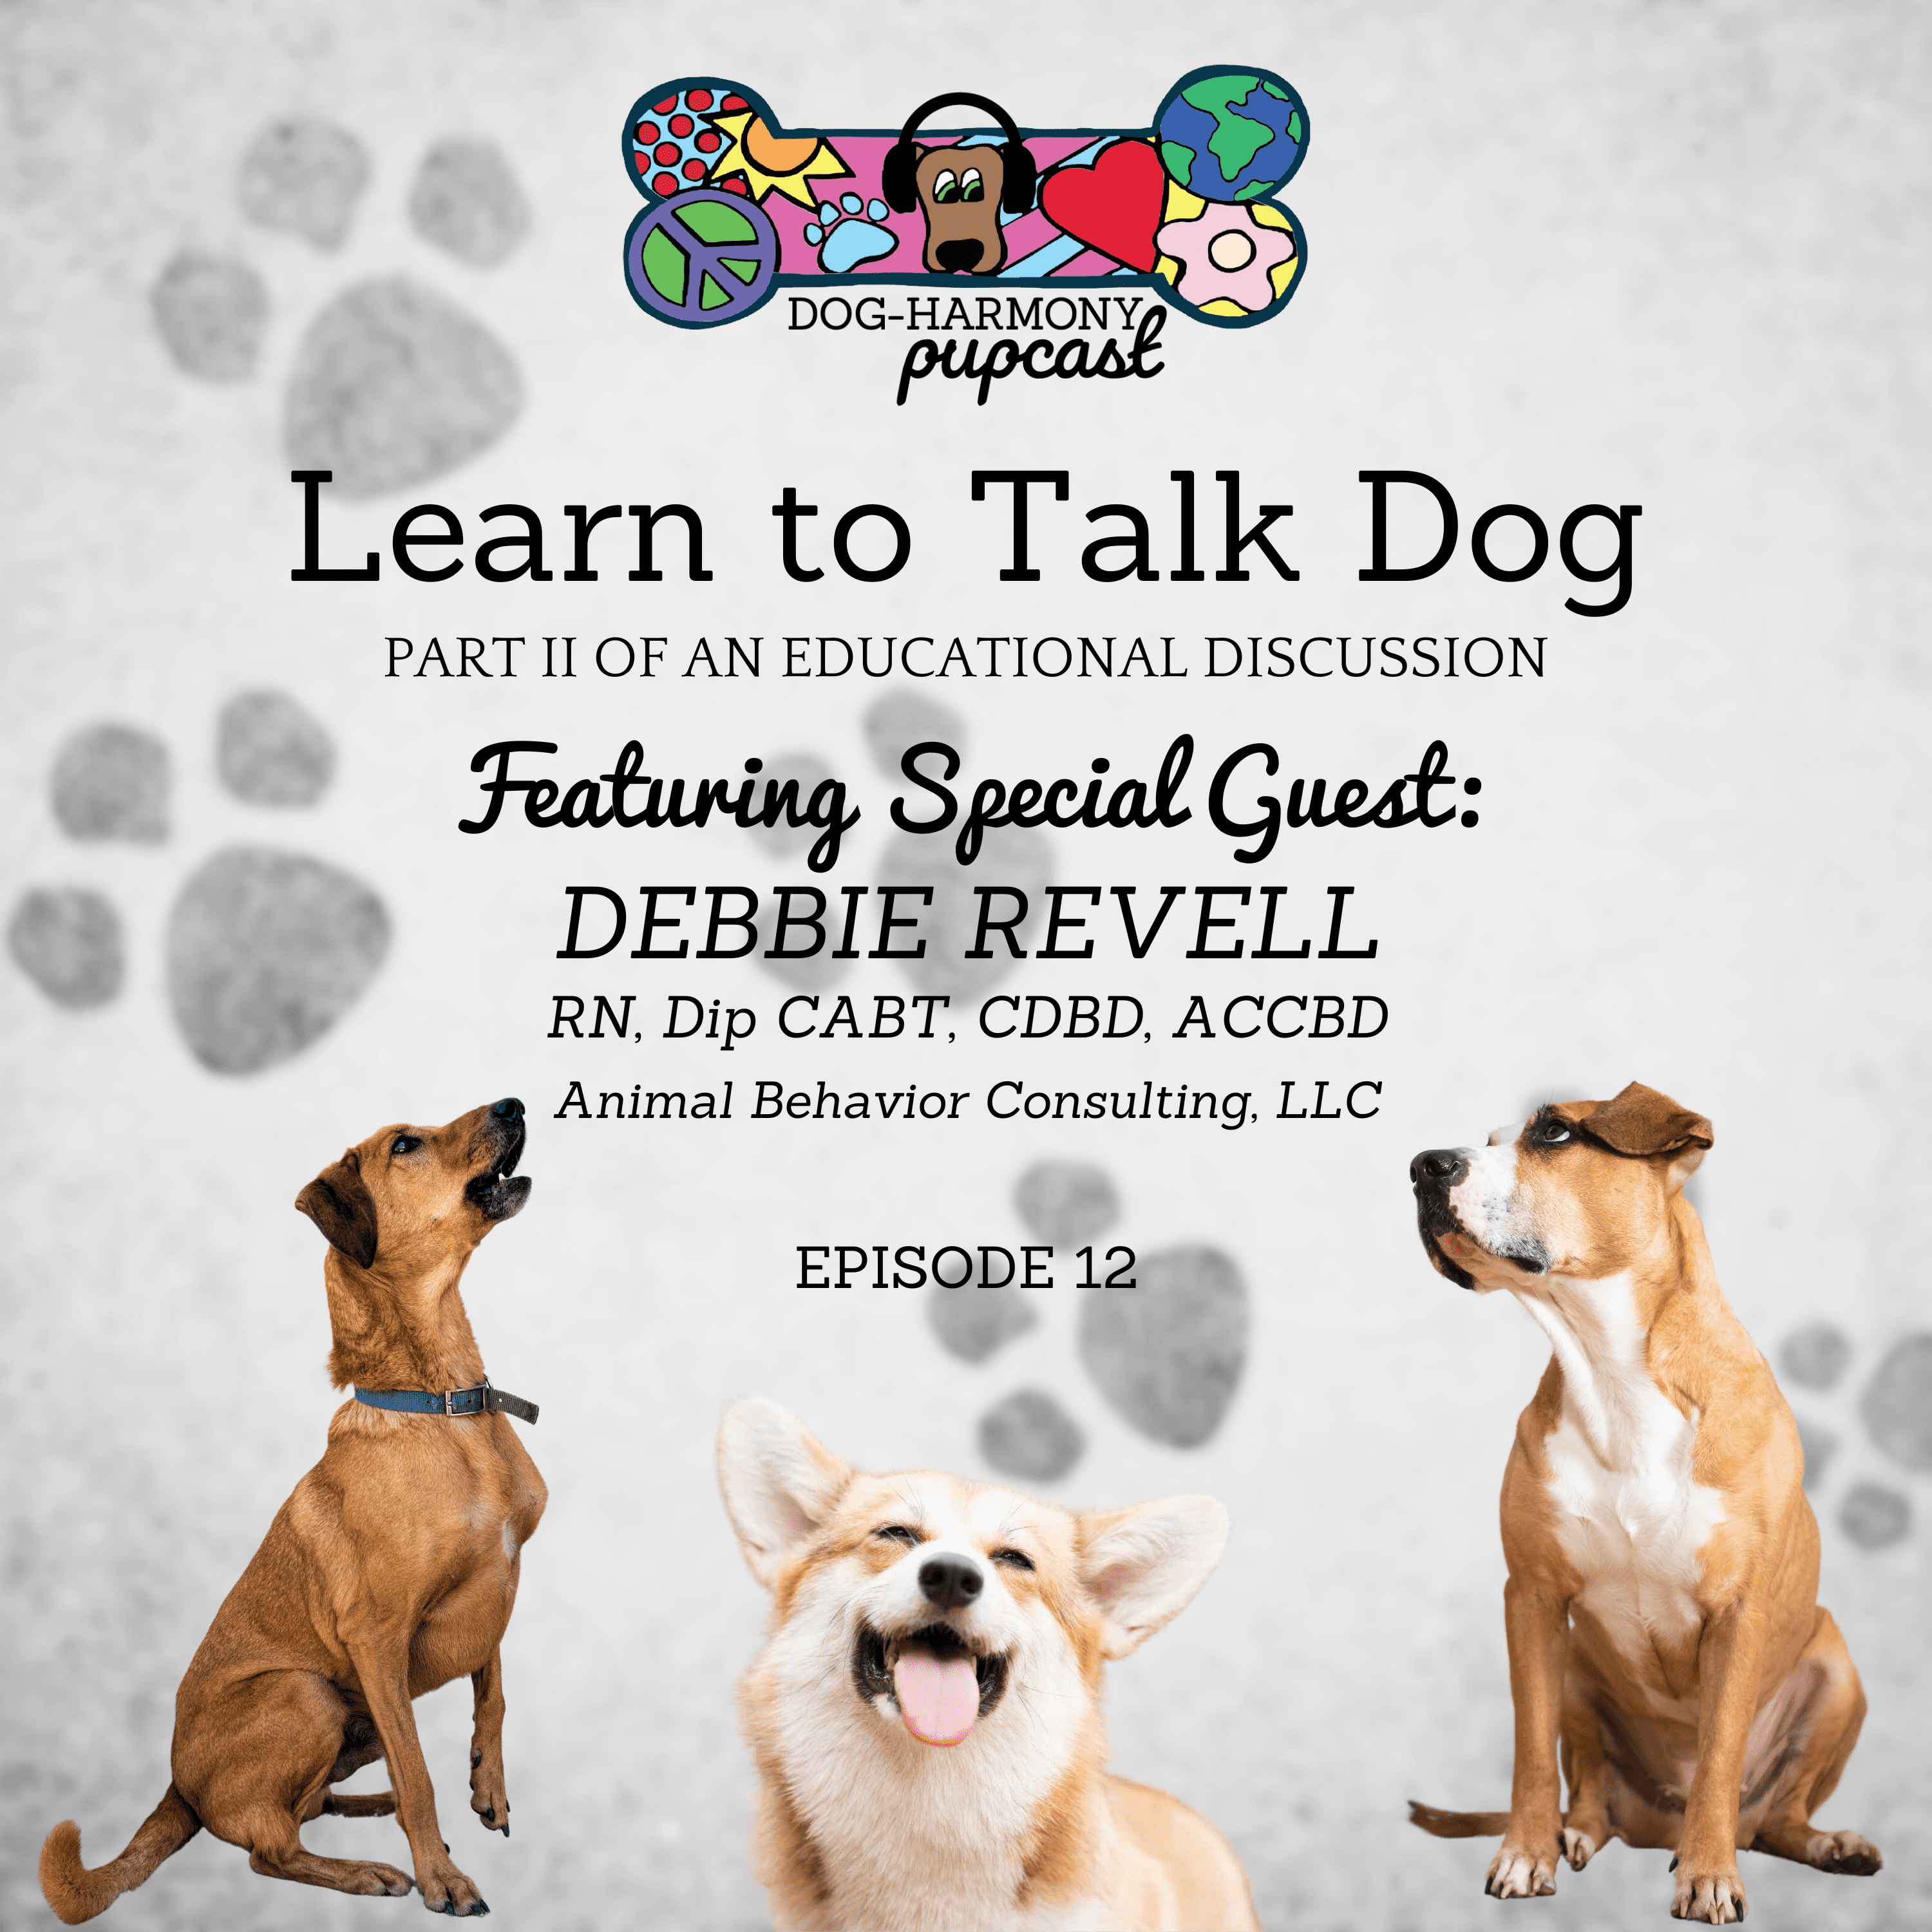 Episode 12: Learn to Talk Dog Part II Featuring Debbie Revell